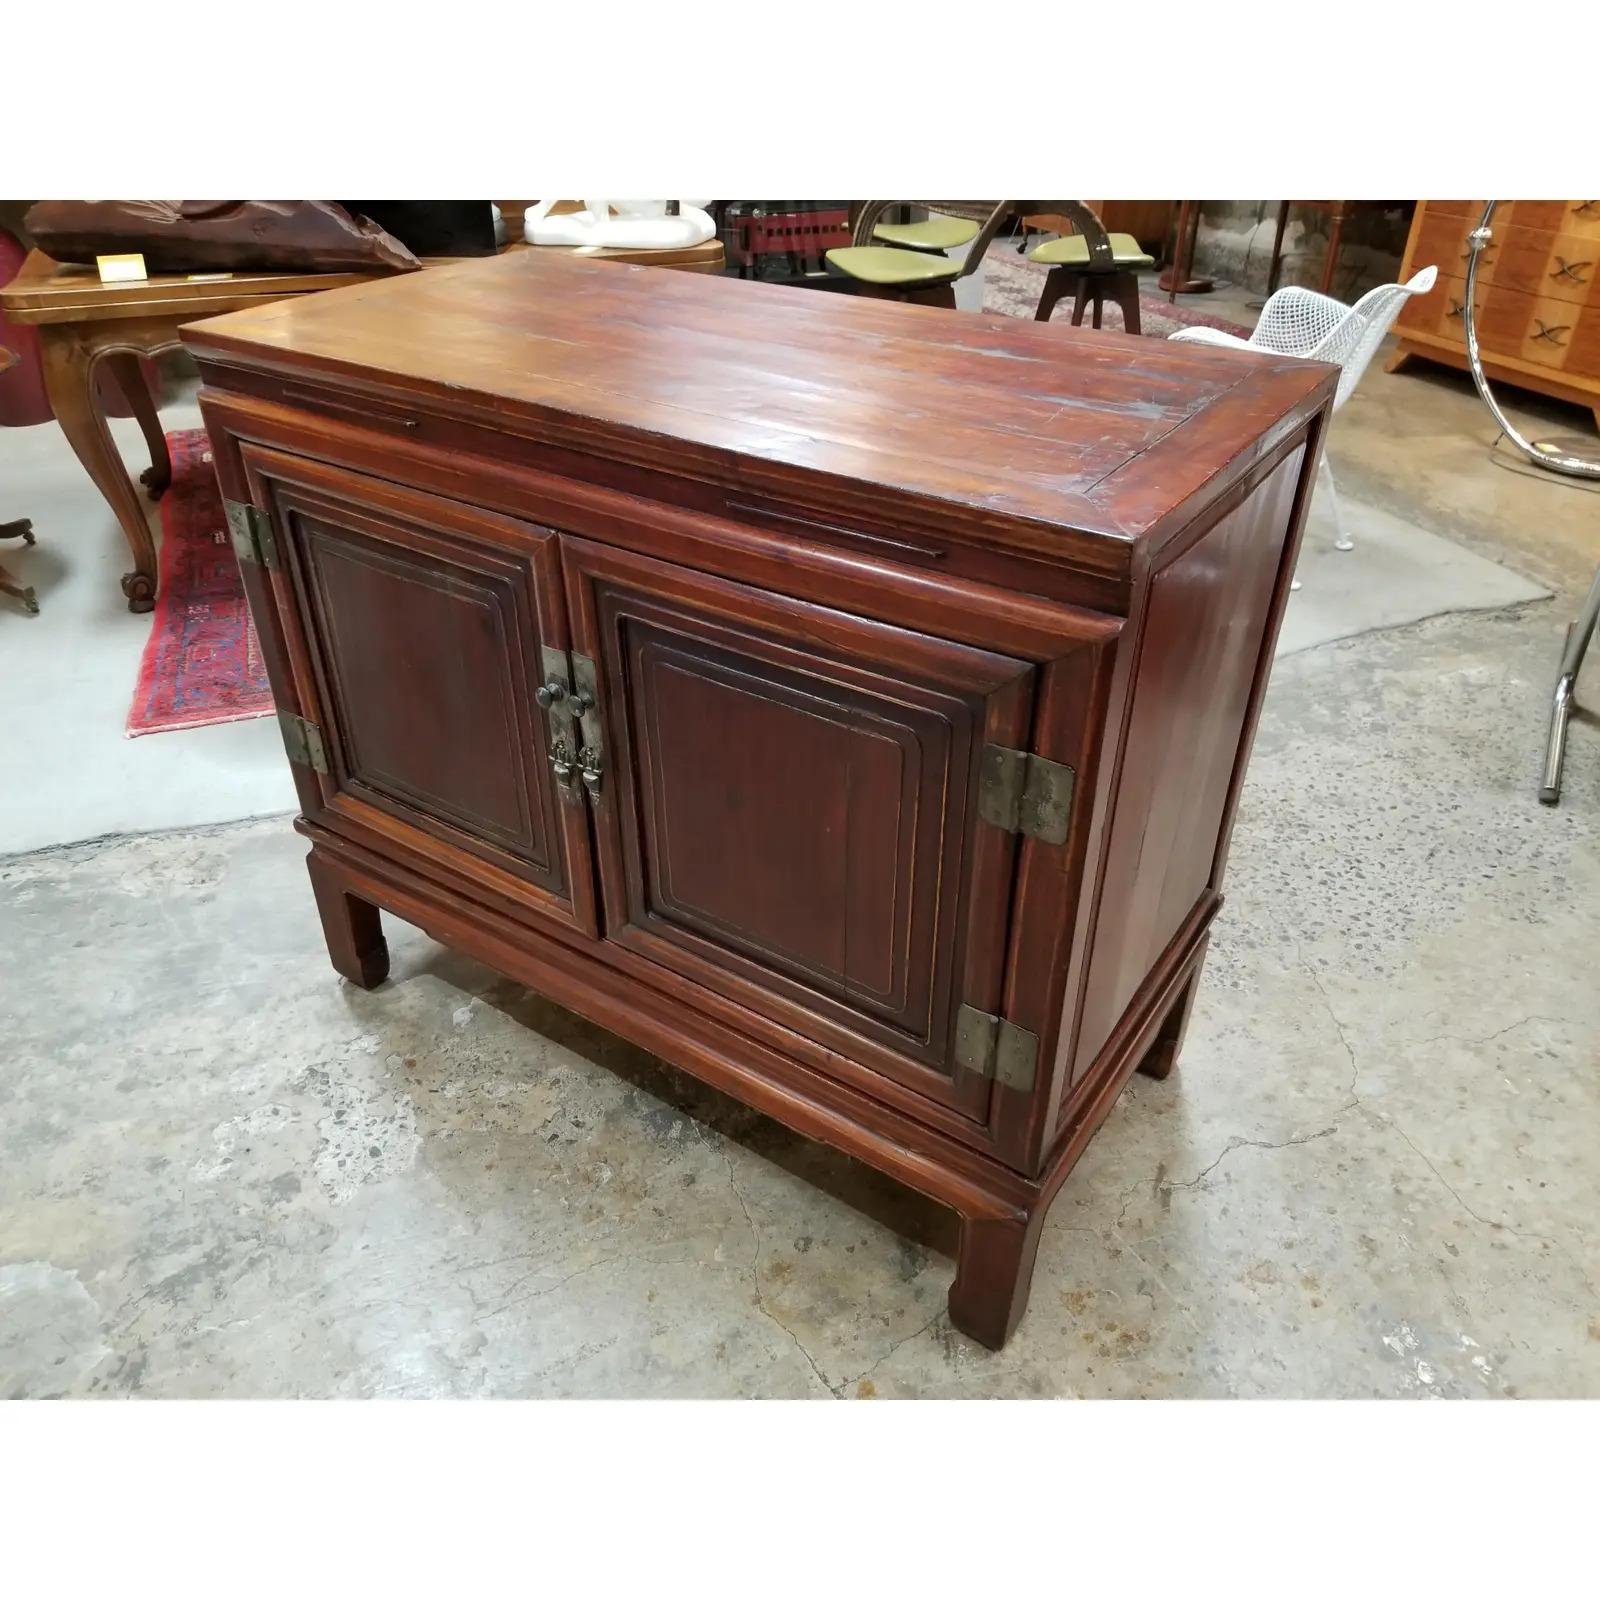 Antique Chinese Qing Dynasty two-door storage cabinet, circa. 1900. Beautiful original finish with nice glow and patina. Notice wonderful highlights to finish at high points of cabinetry. Unusual 